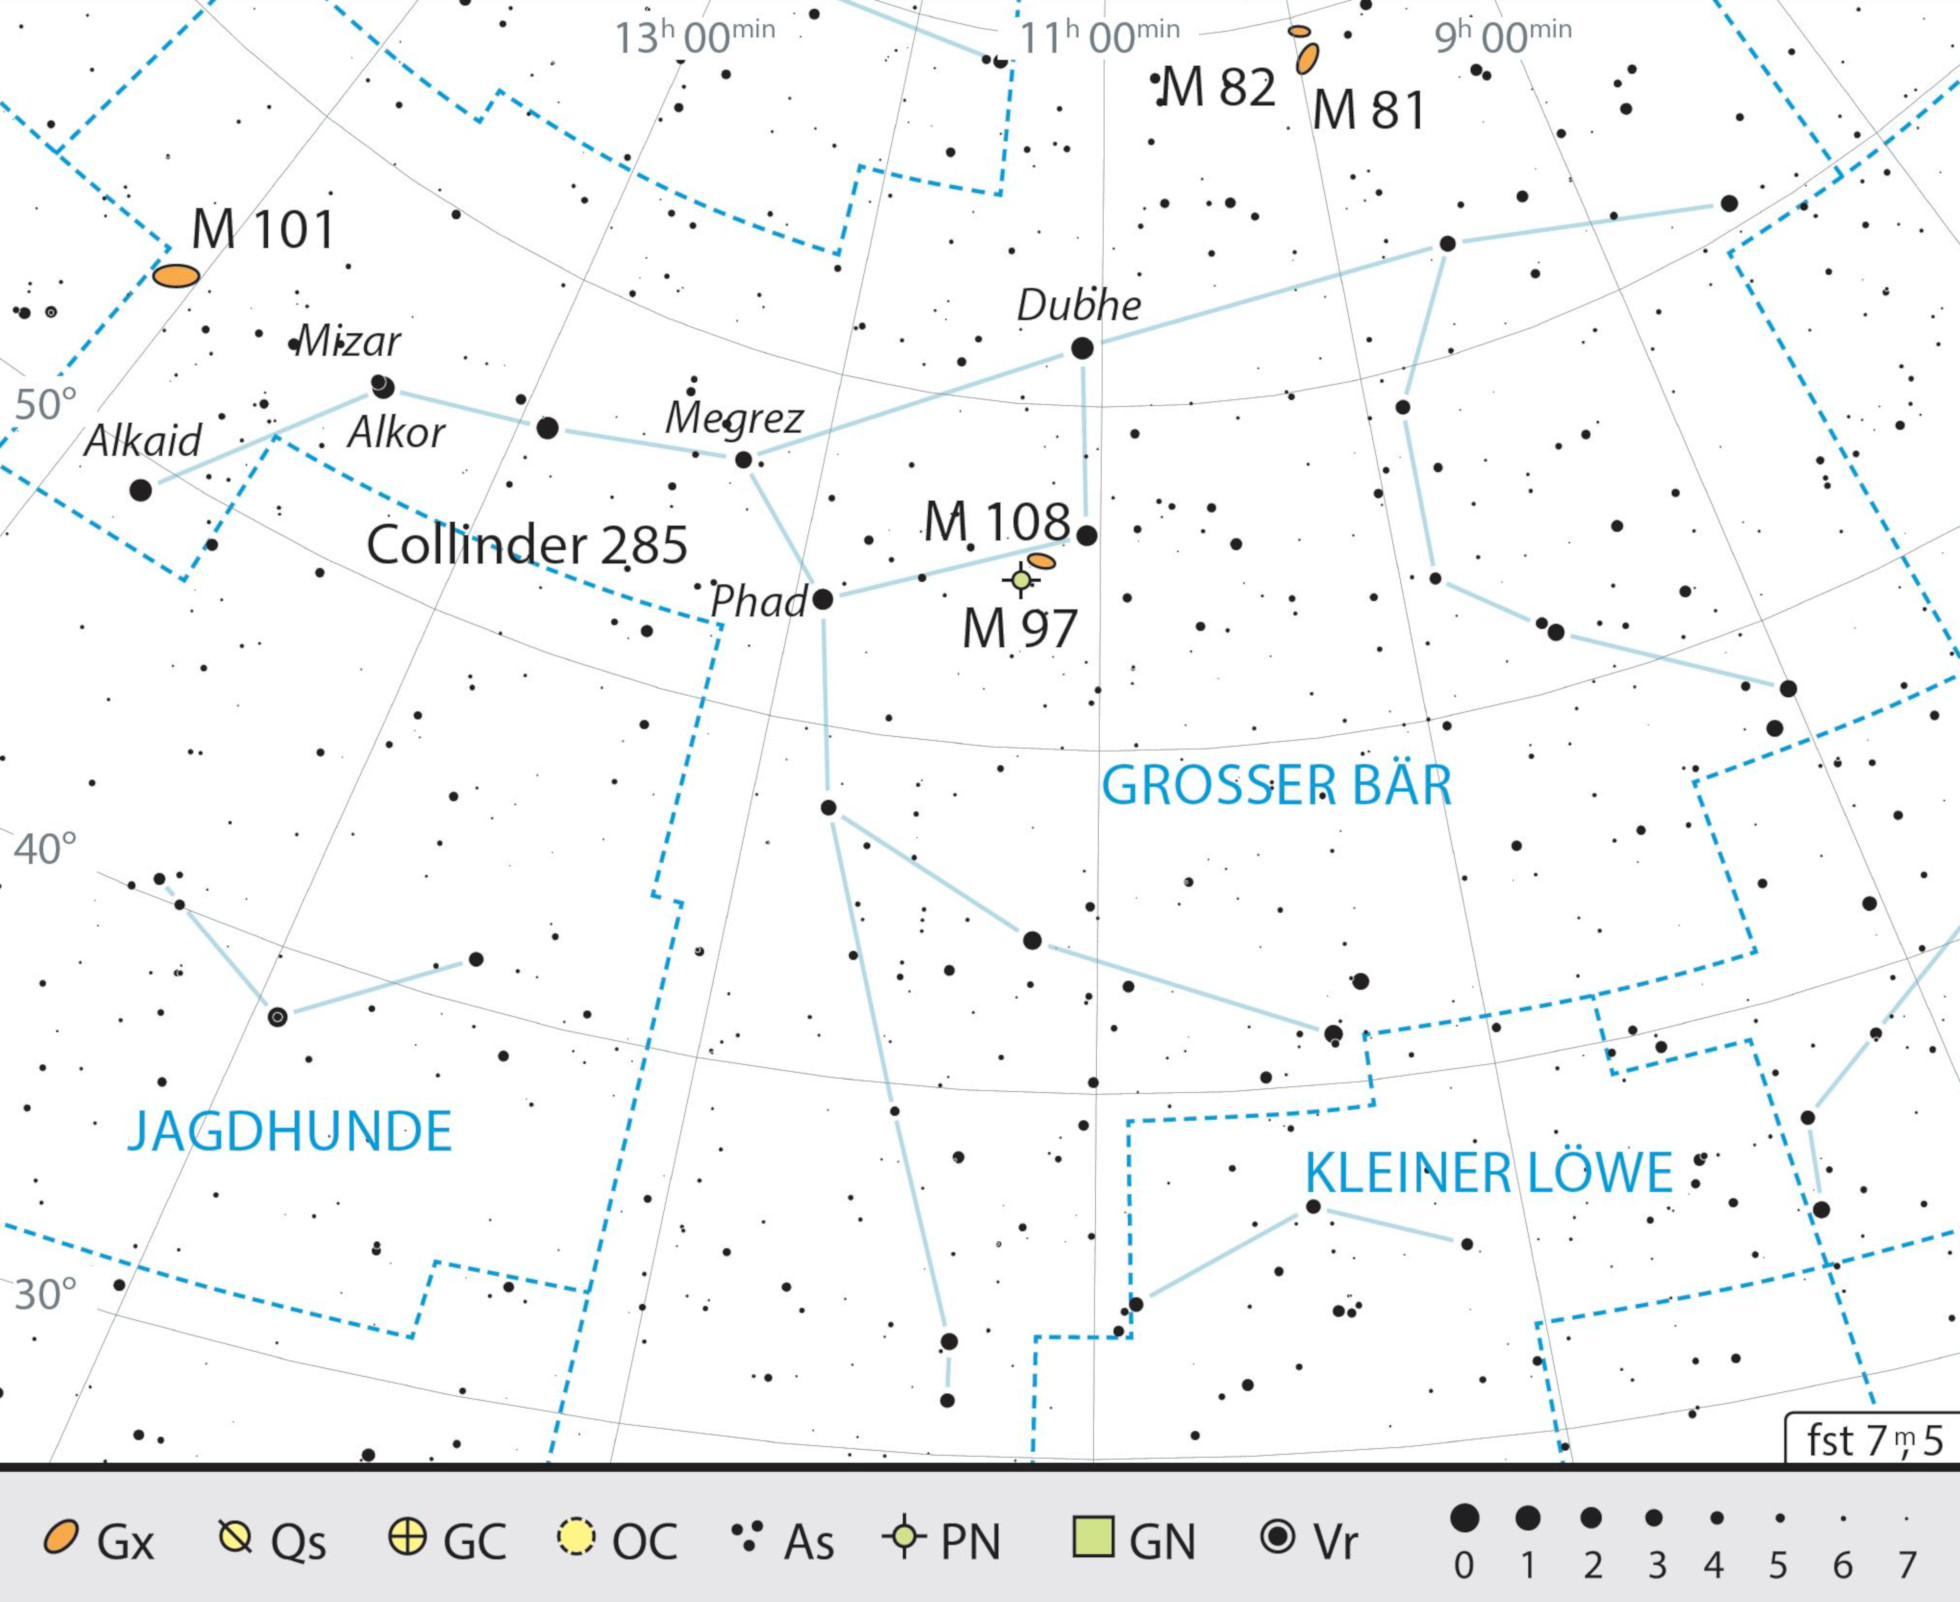 Outline map of the constellation of Ursa Major with our observing recommendations. J. Scholten